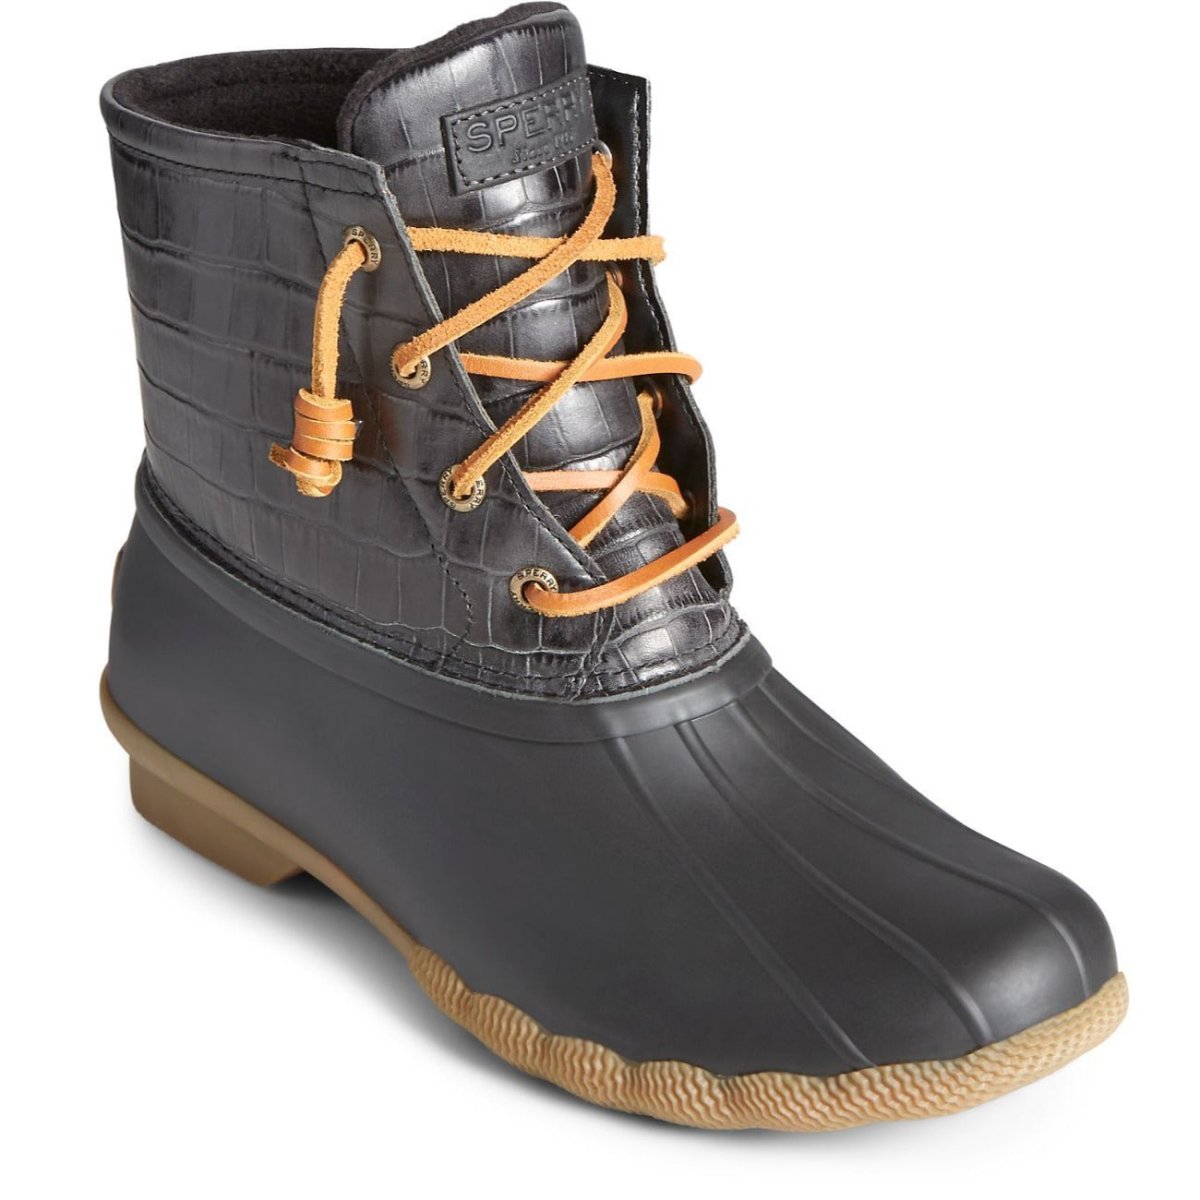 Sperry Men's Ice Bay Tall Thinsulate Boot - Black/Tan – Seliga Shoes